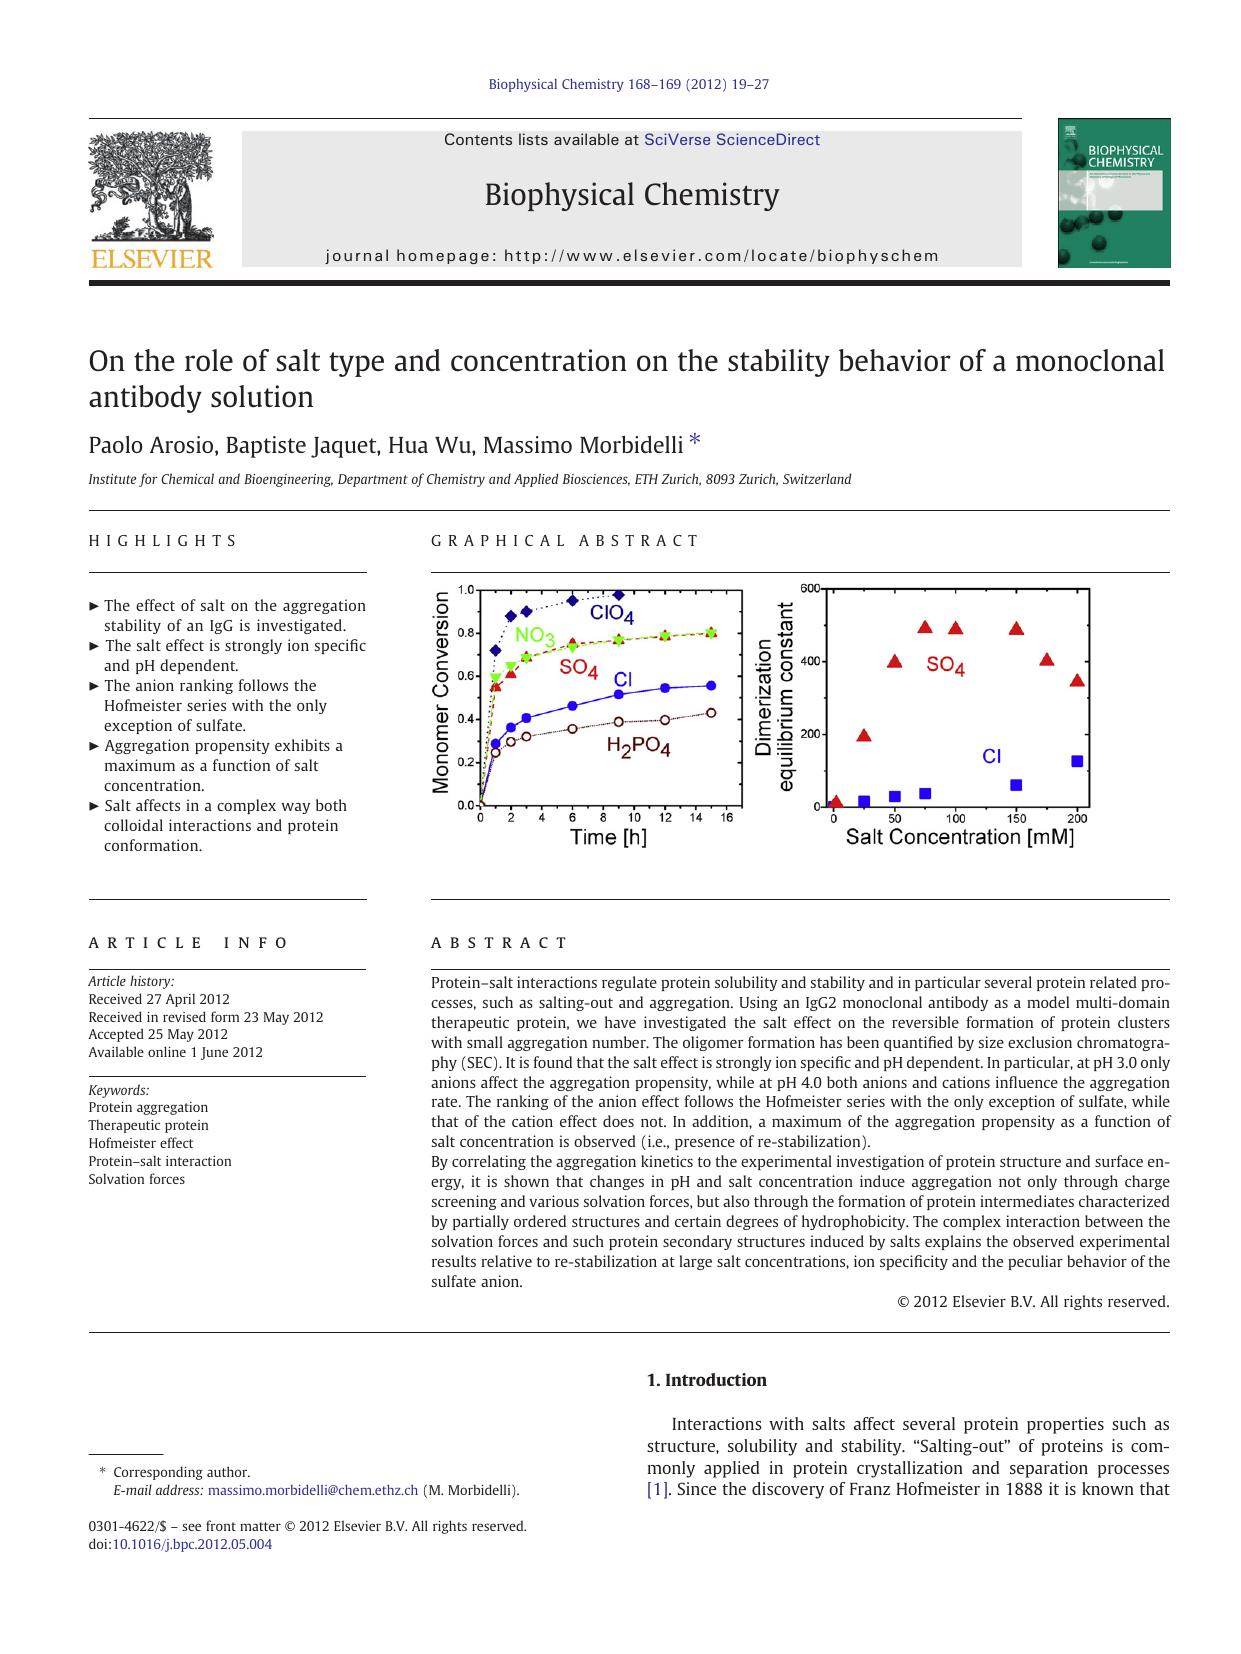 On the role of salt type and concentration on the stability behavior of a monoclonal antibody solution by Paolo Arosio & Baptiste Jaquet & Hua Wu & Massimo Morbidelli